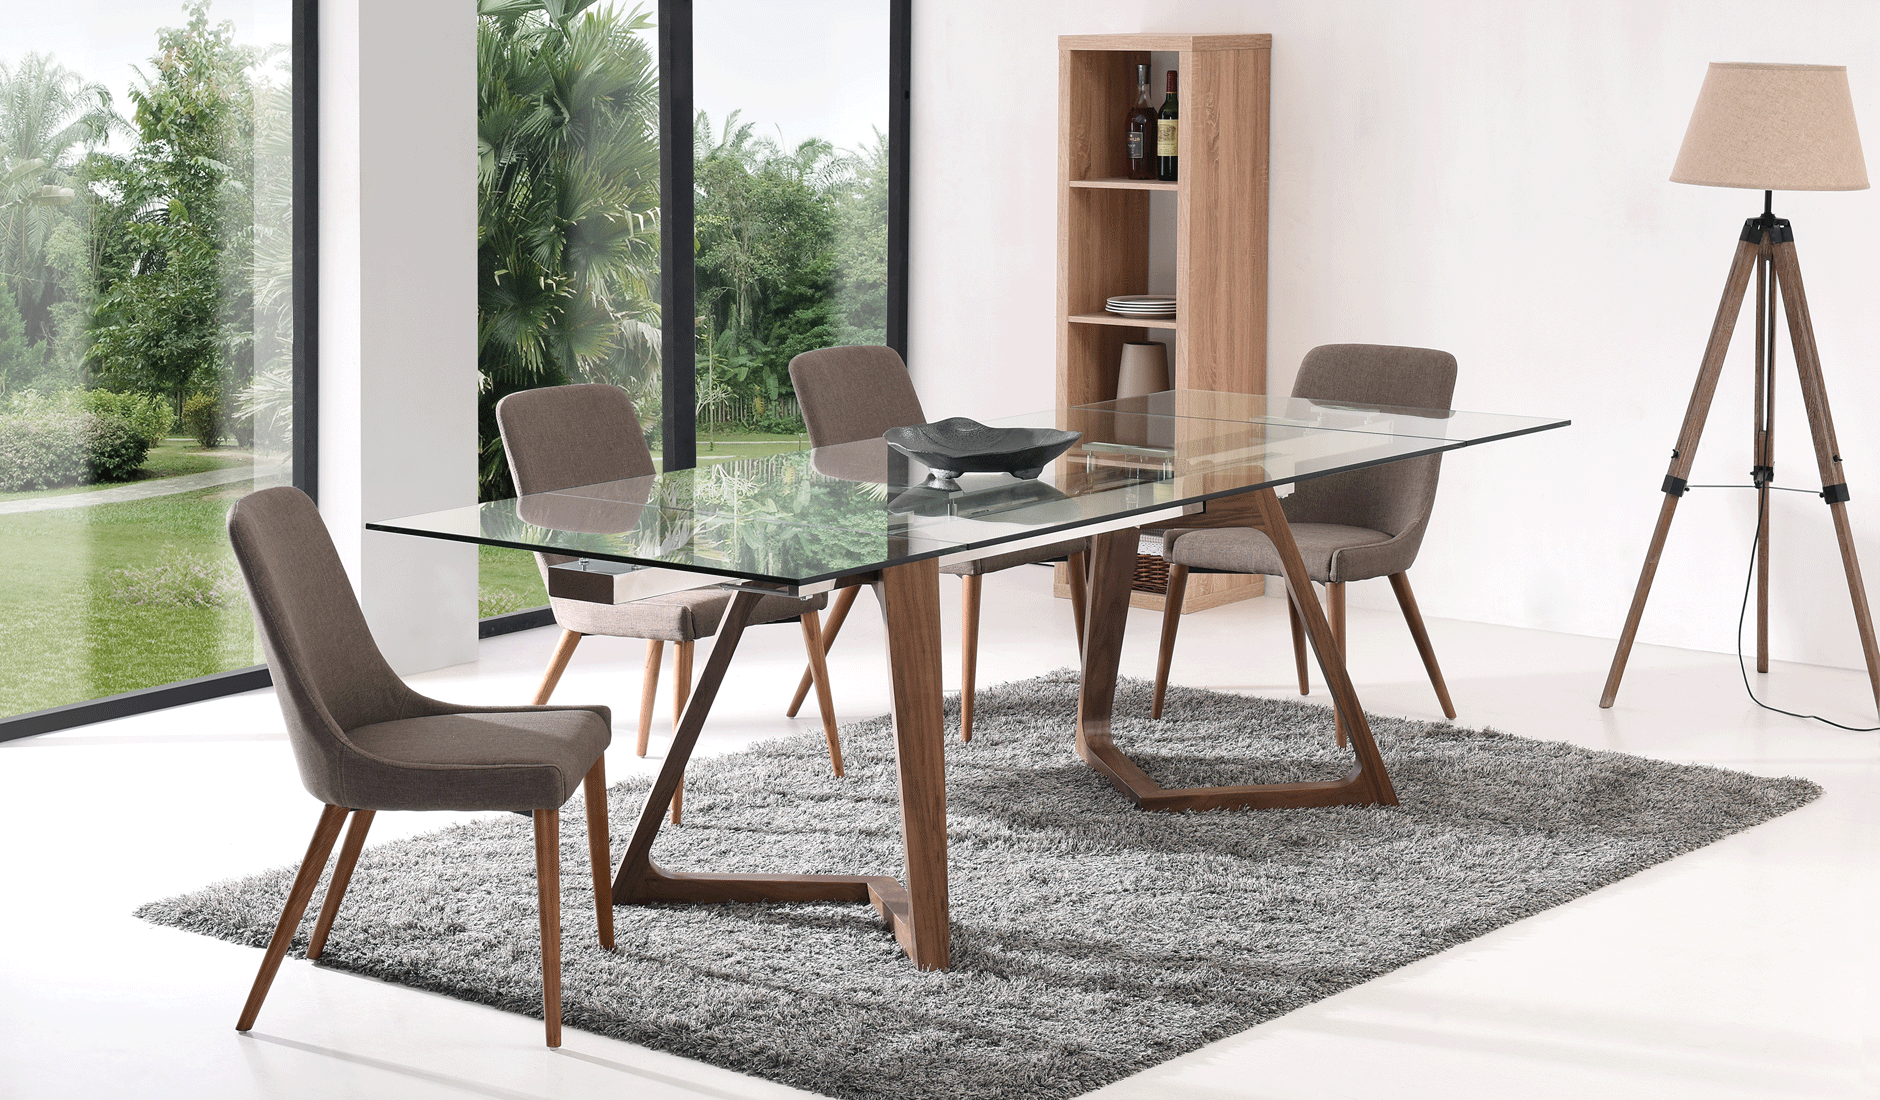 Brands Franco AZKARY II SIDEBOARDS, SPAIN 8811 Table and 941 Chairs